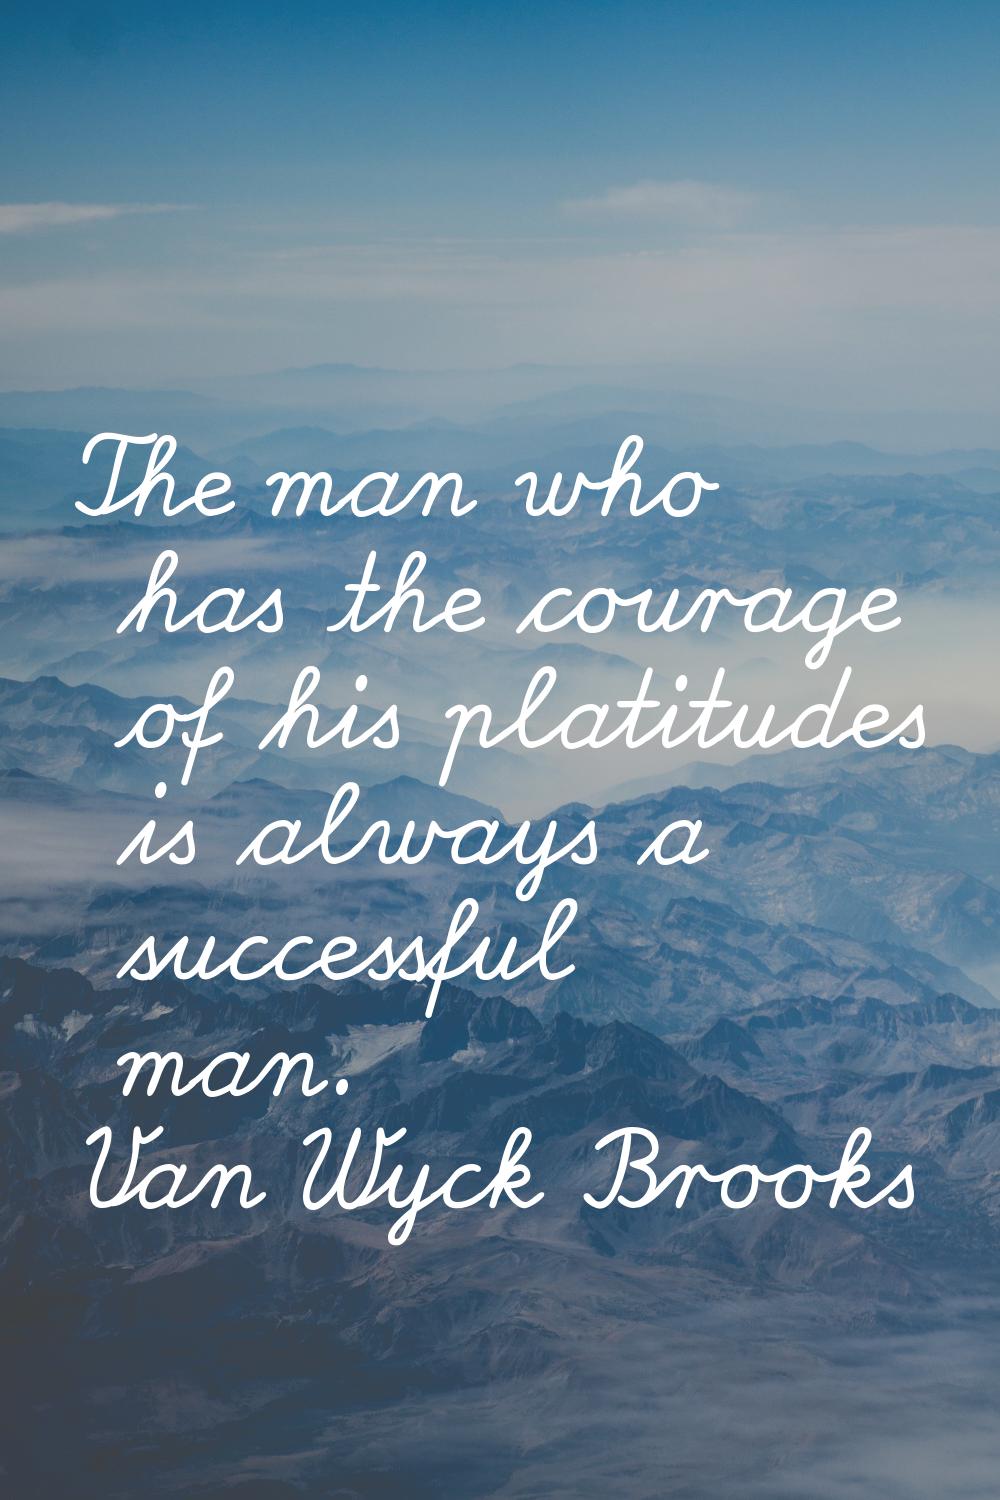 The man who has the courage of his platitudes is always a successful man.